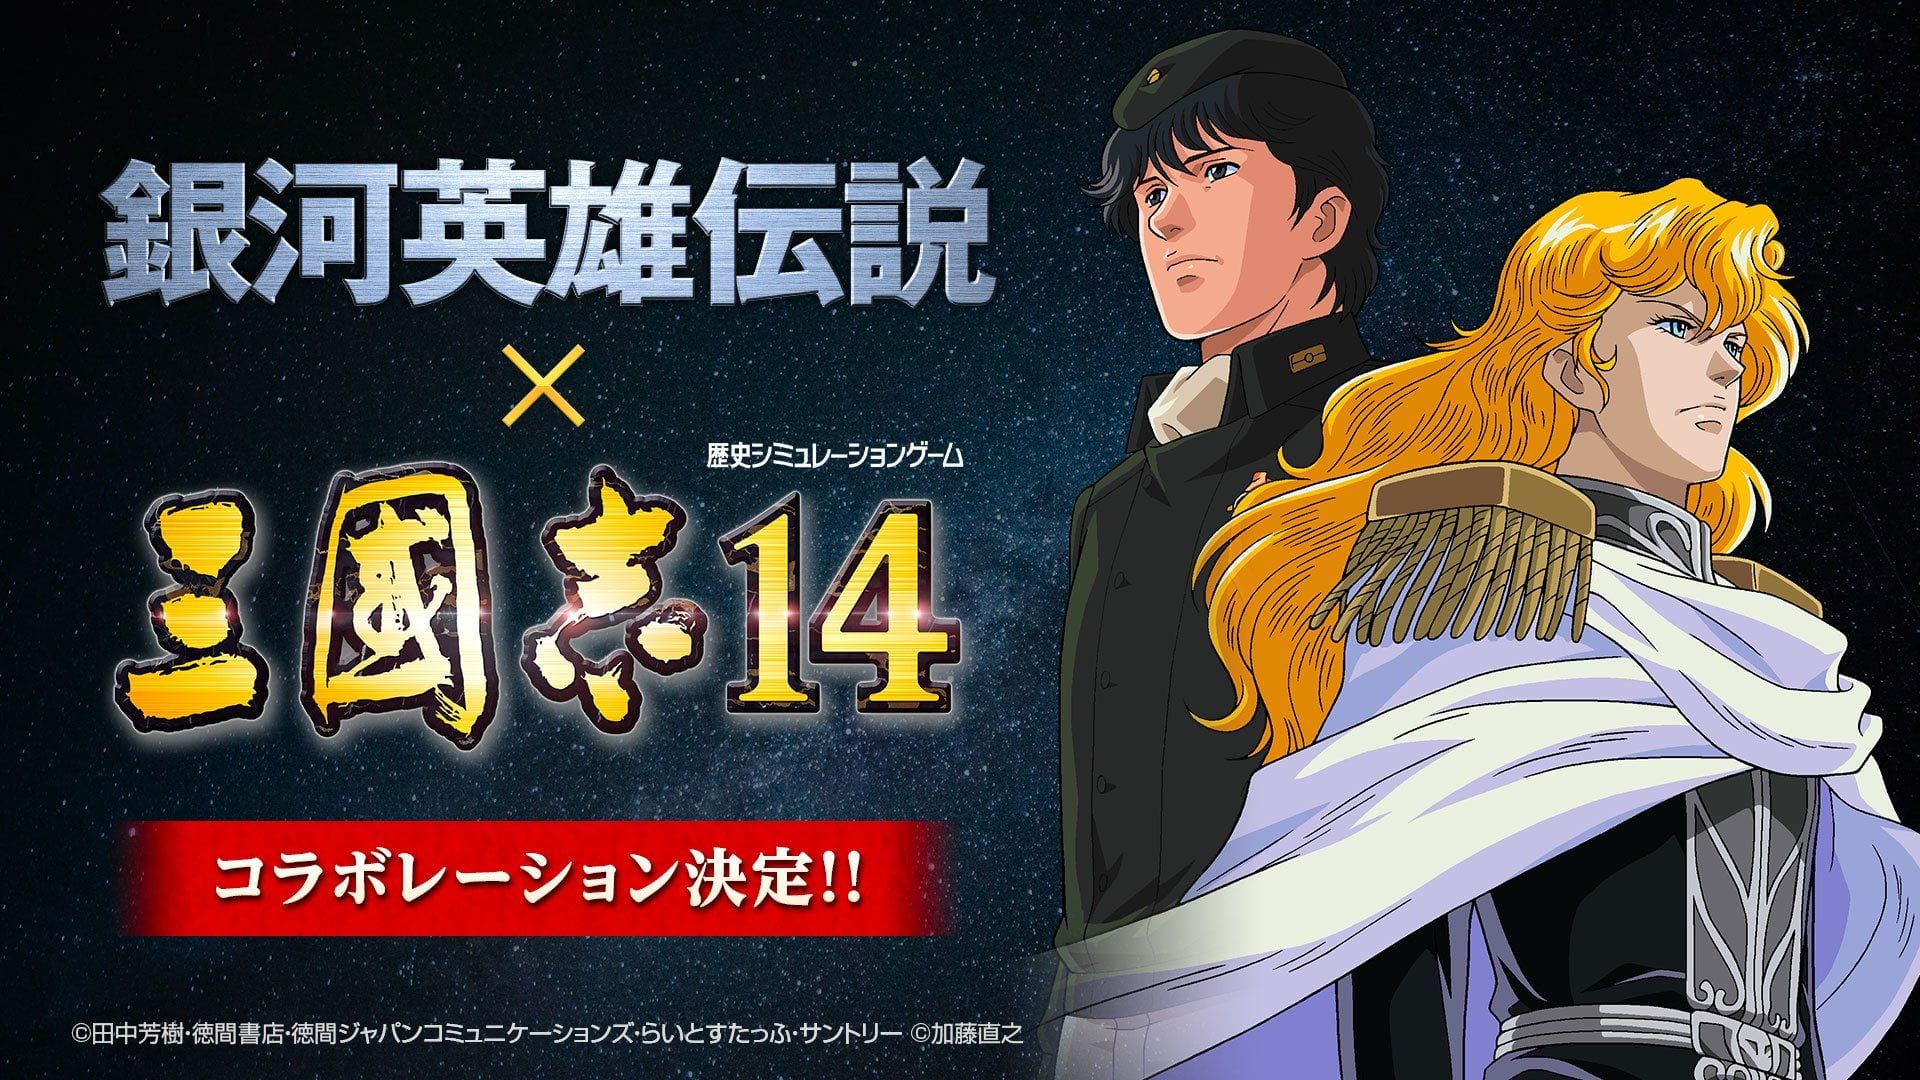 Romance Of The Three Kingdoms Xiv X Legend Of The Galactic Heroes Collaboration Extends To Old Anime